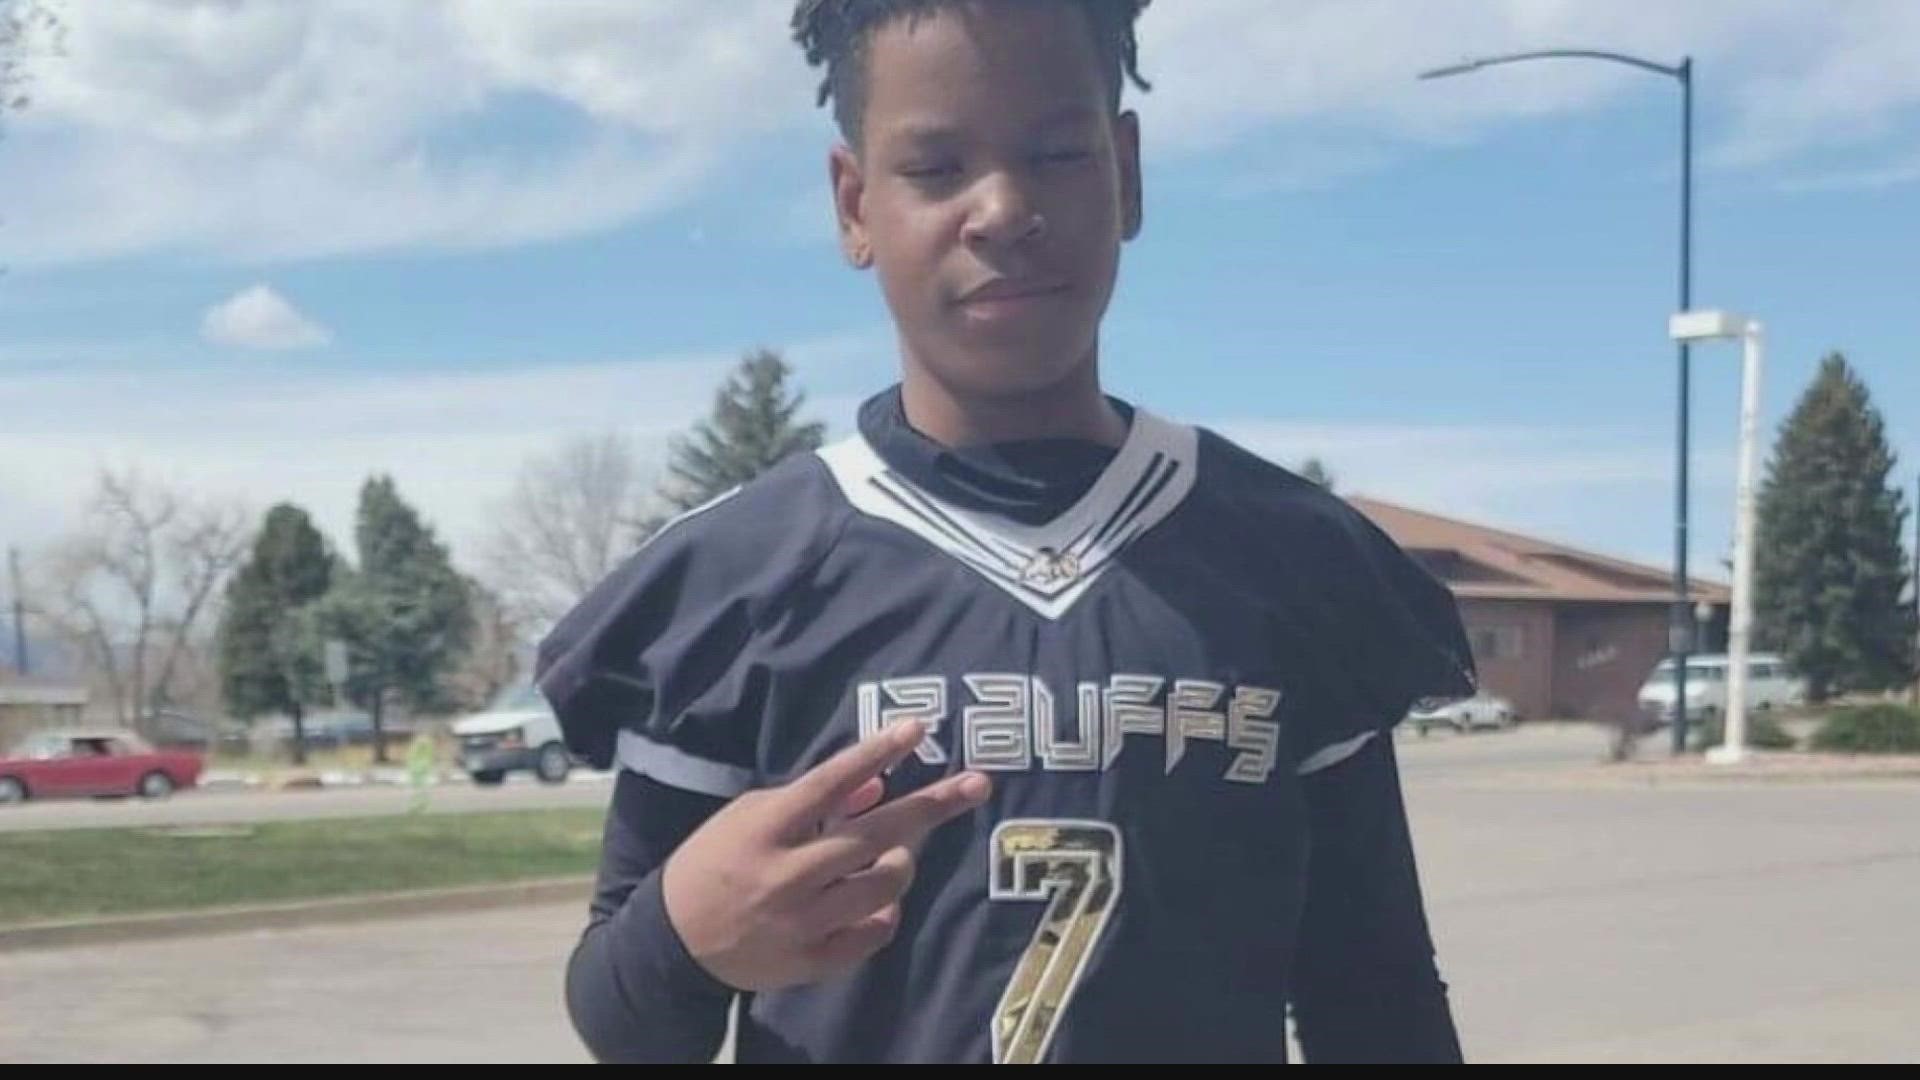 13-year-old Darryl Blackmon dreams of playing in the NFL someday. Now, he's on life support in a Phoenix hospital after a near-drowning.